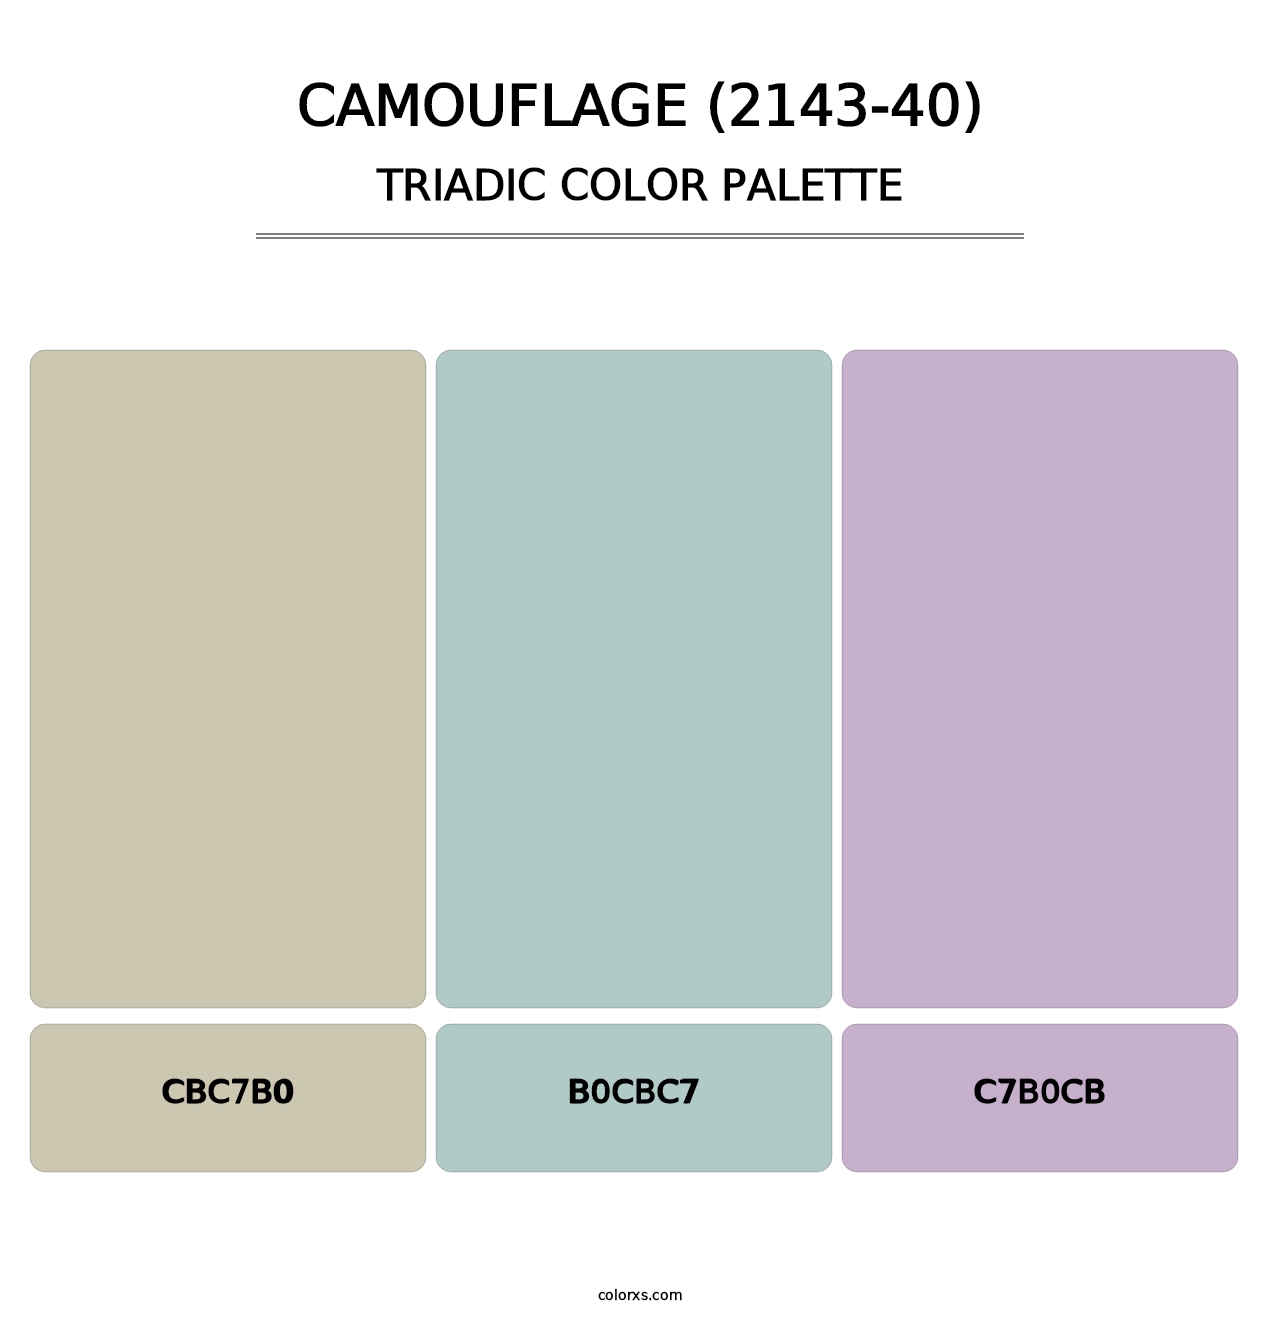 Camouflage (2143-40) - Triadic Color Palette